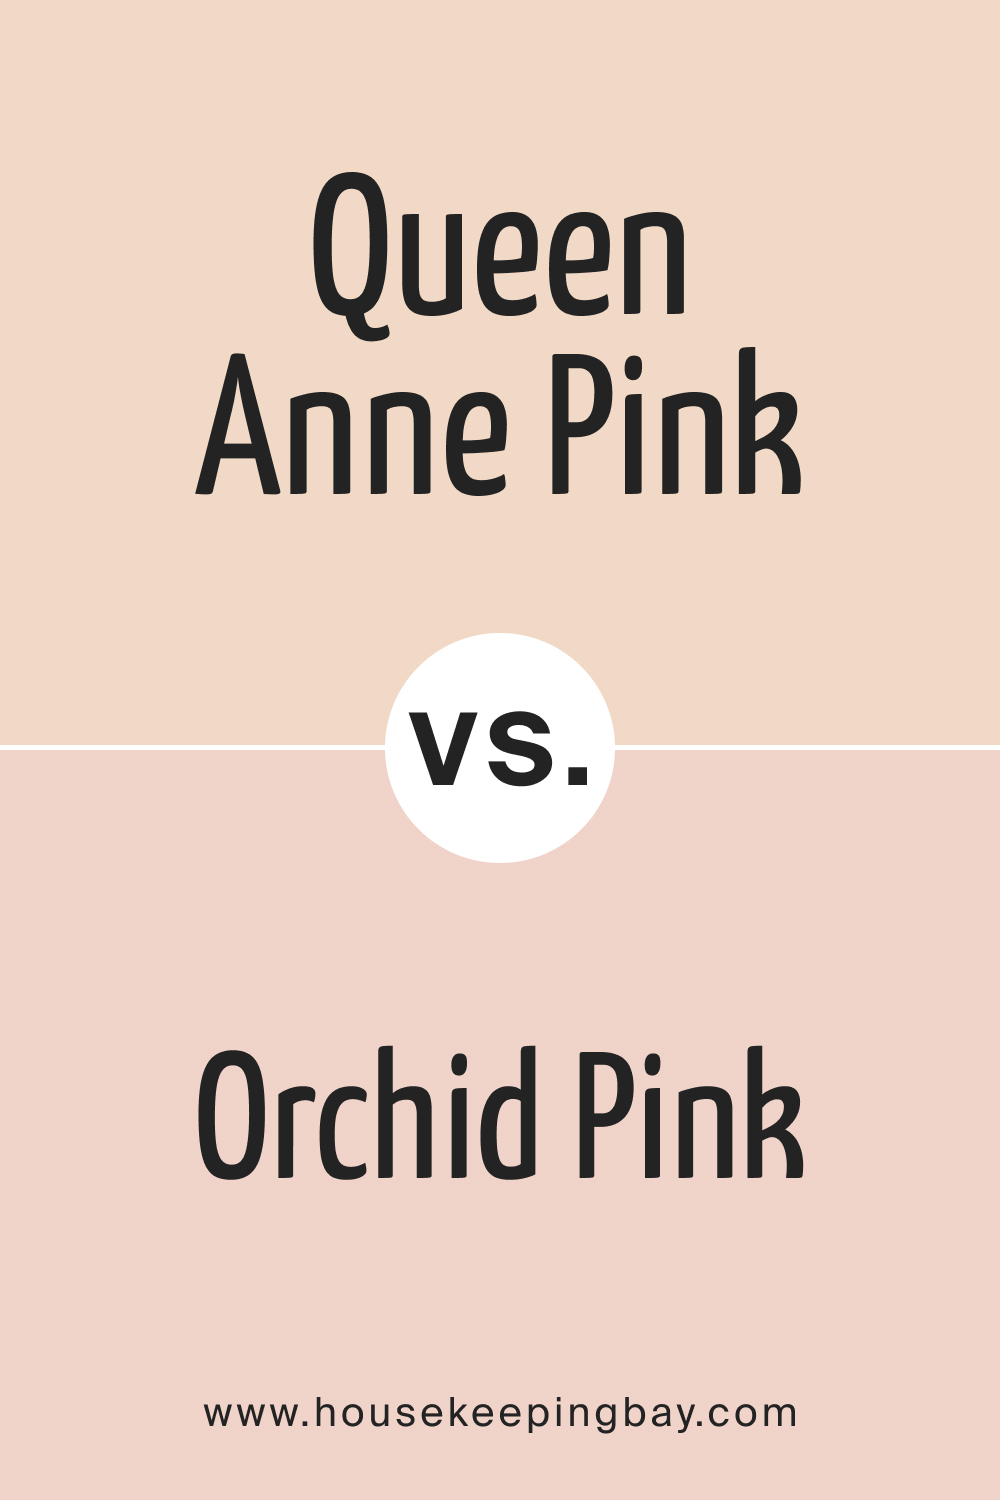 Queen Anne Pink HC-60 vs. BM 036 Orchid Pink